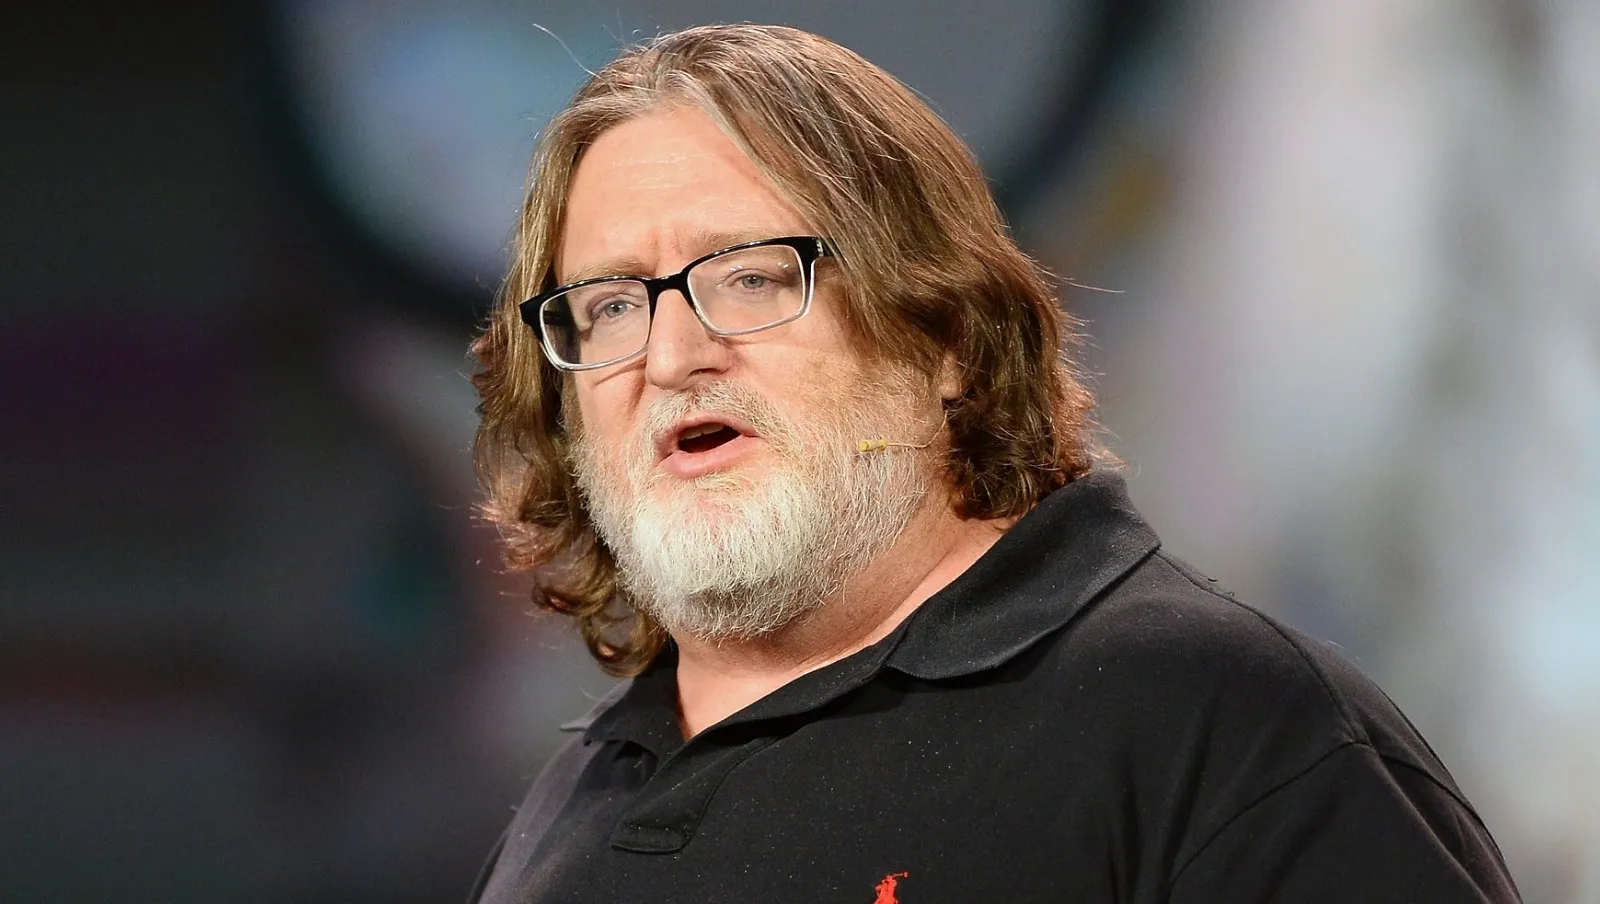 Gabe Newell delivering Steam Deck himself while reminiscing about